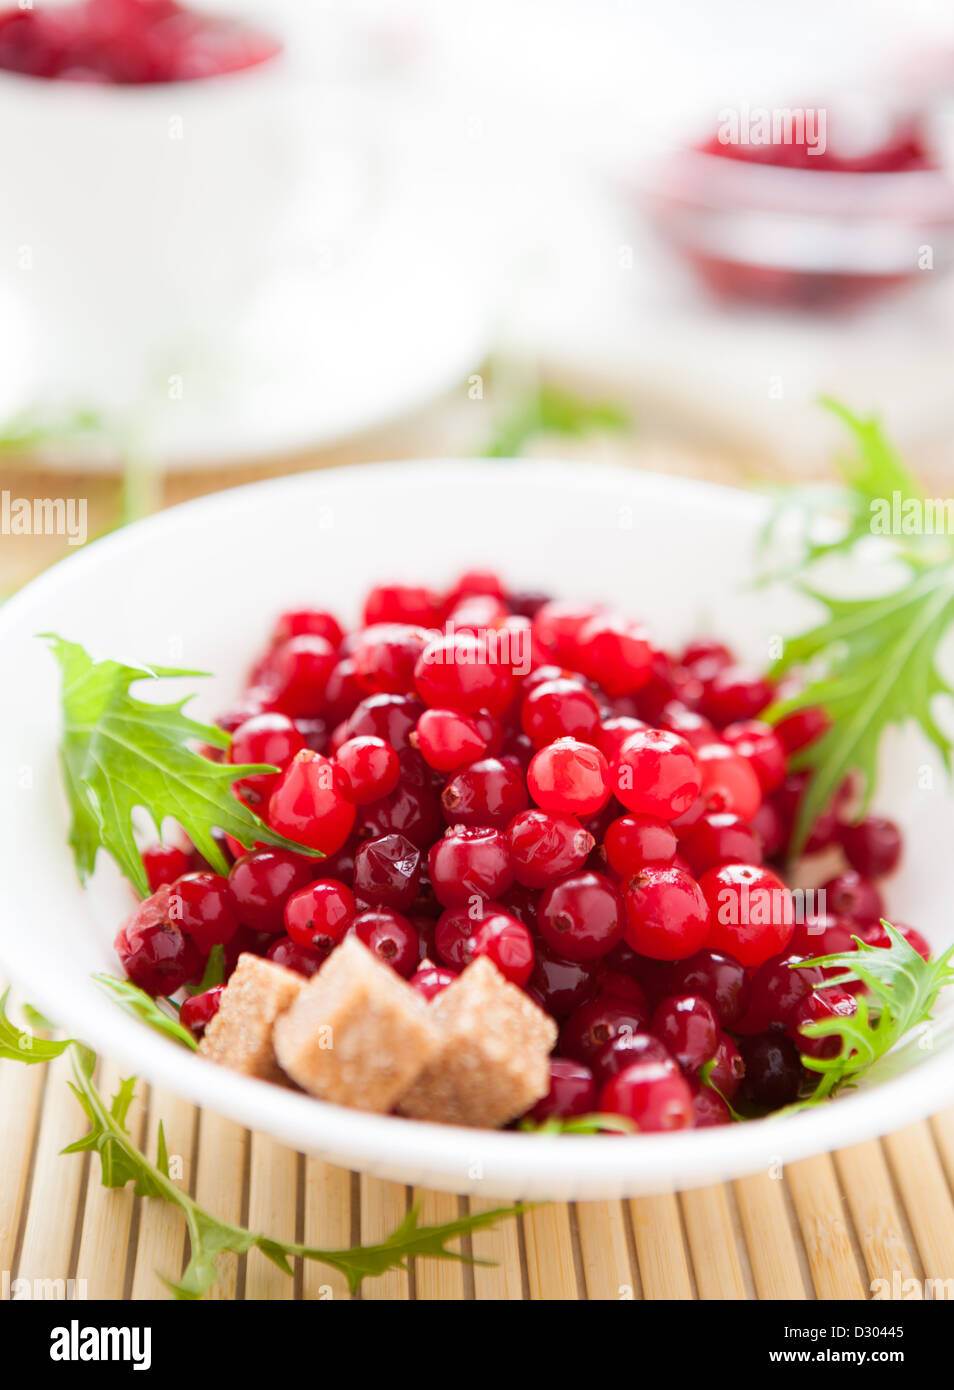 Cranberry with cane sugar in a white bowl, closeup Stock Photo